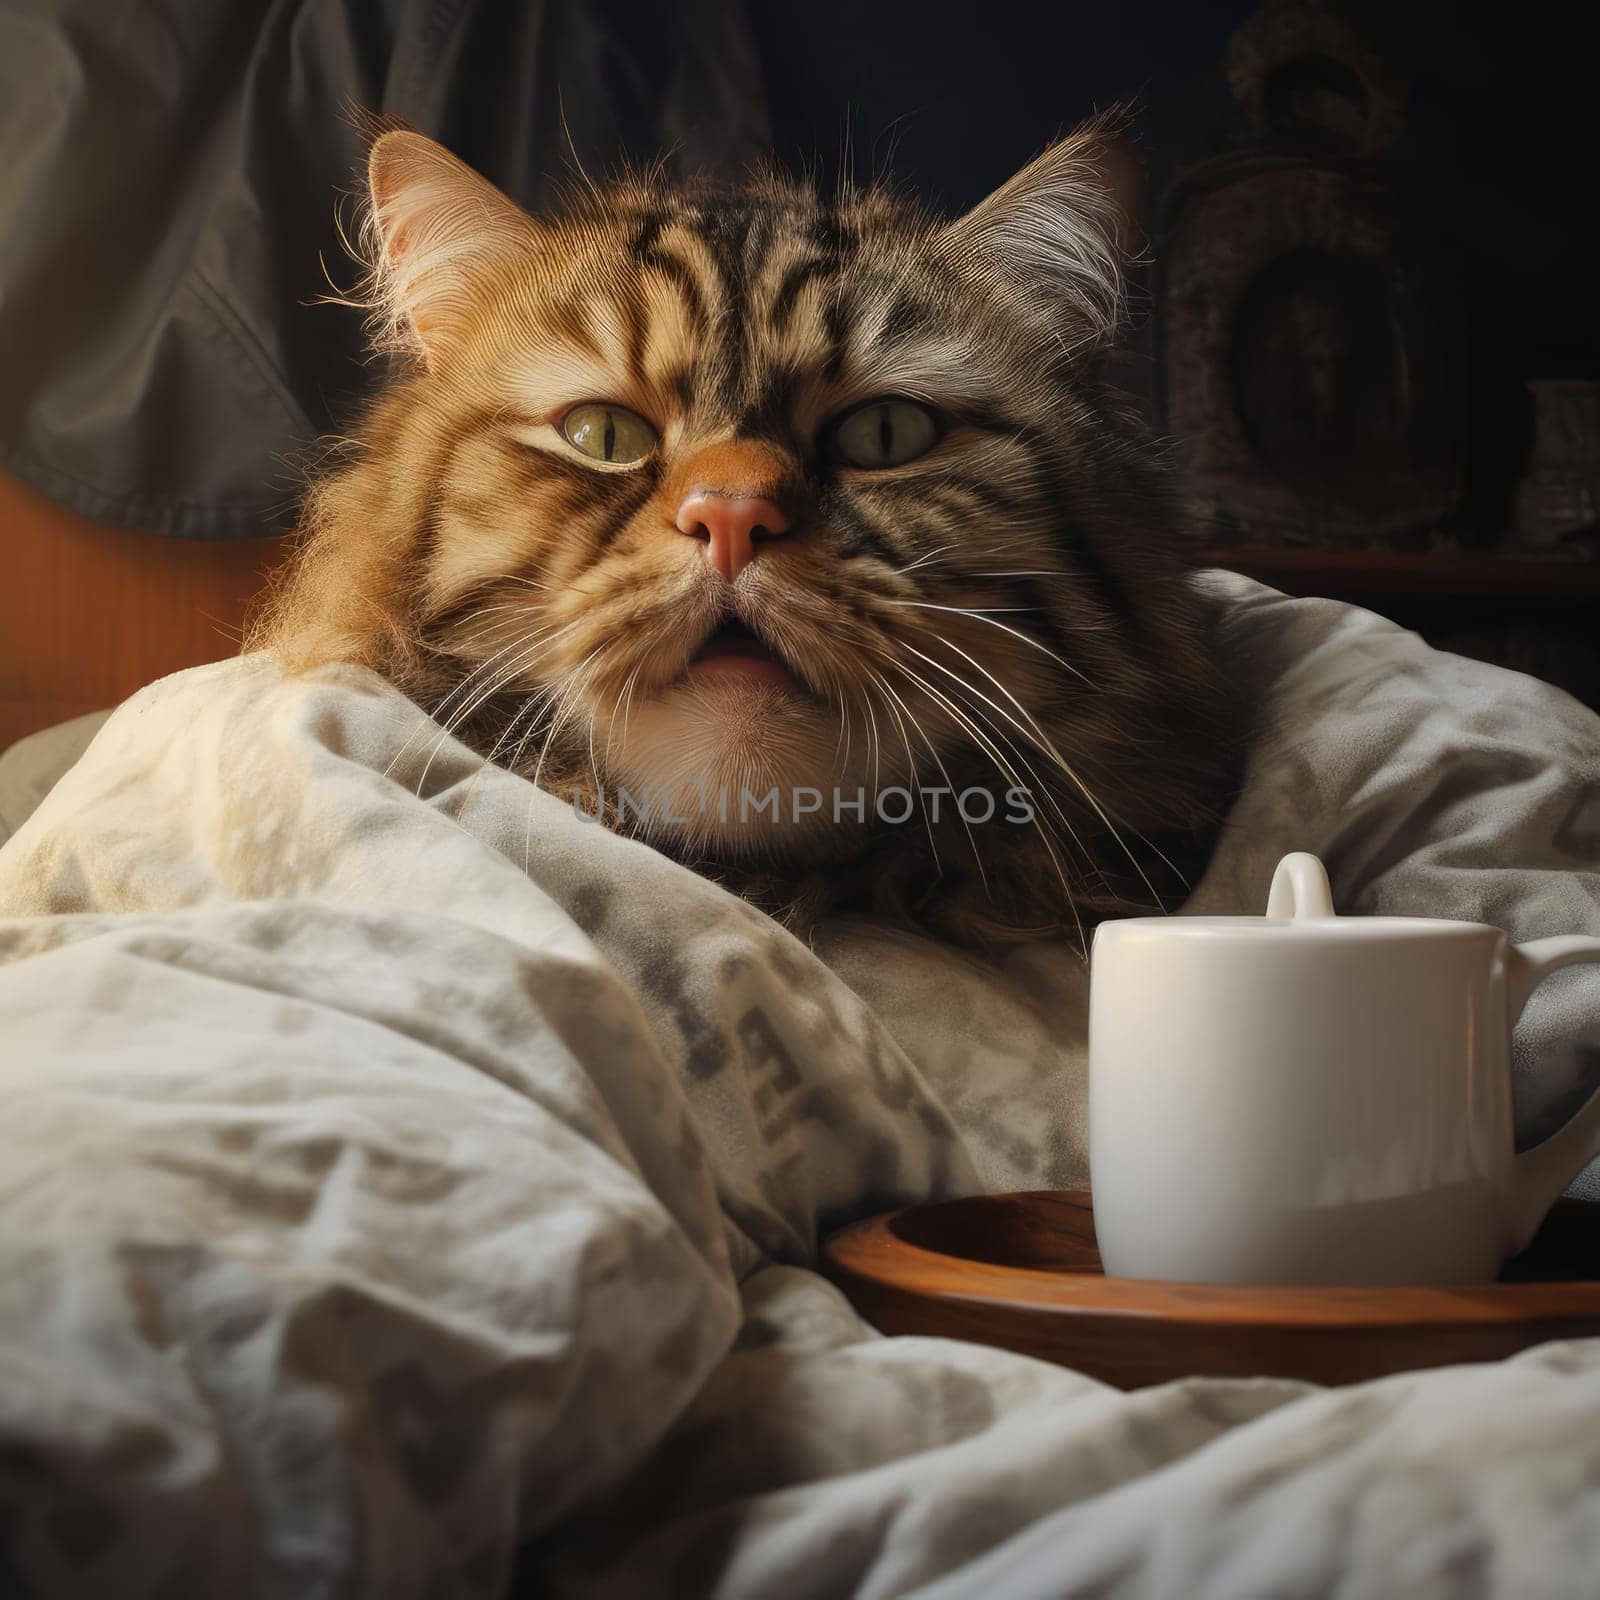 Disgruntled cat in bed by cherezoff